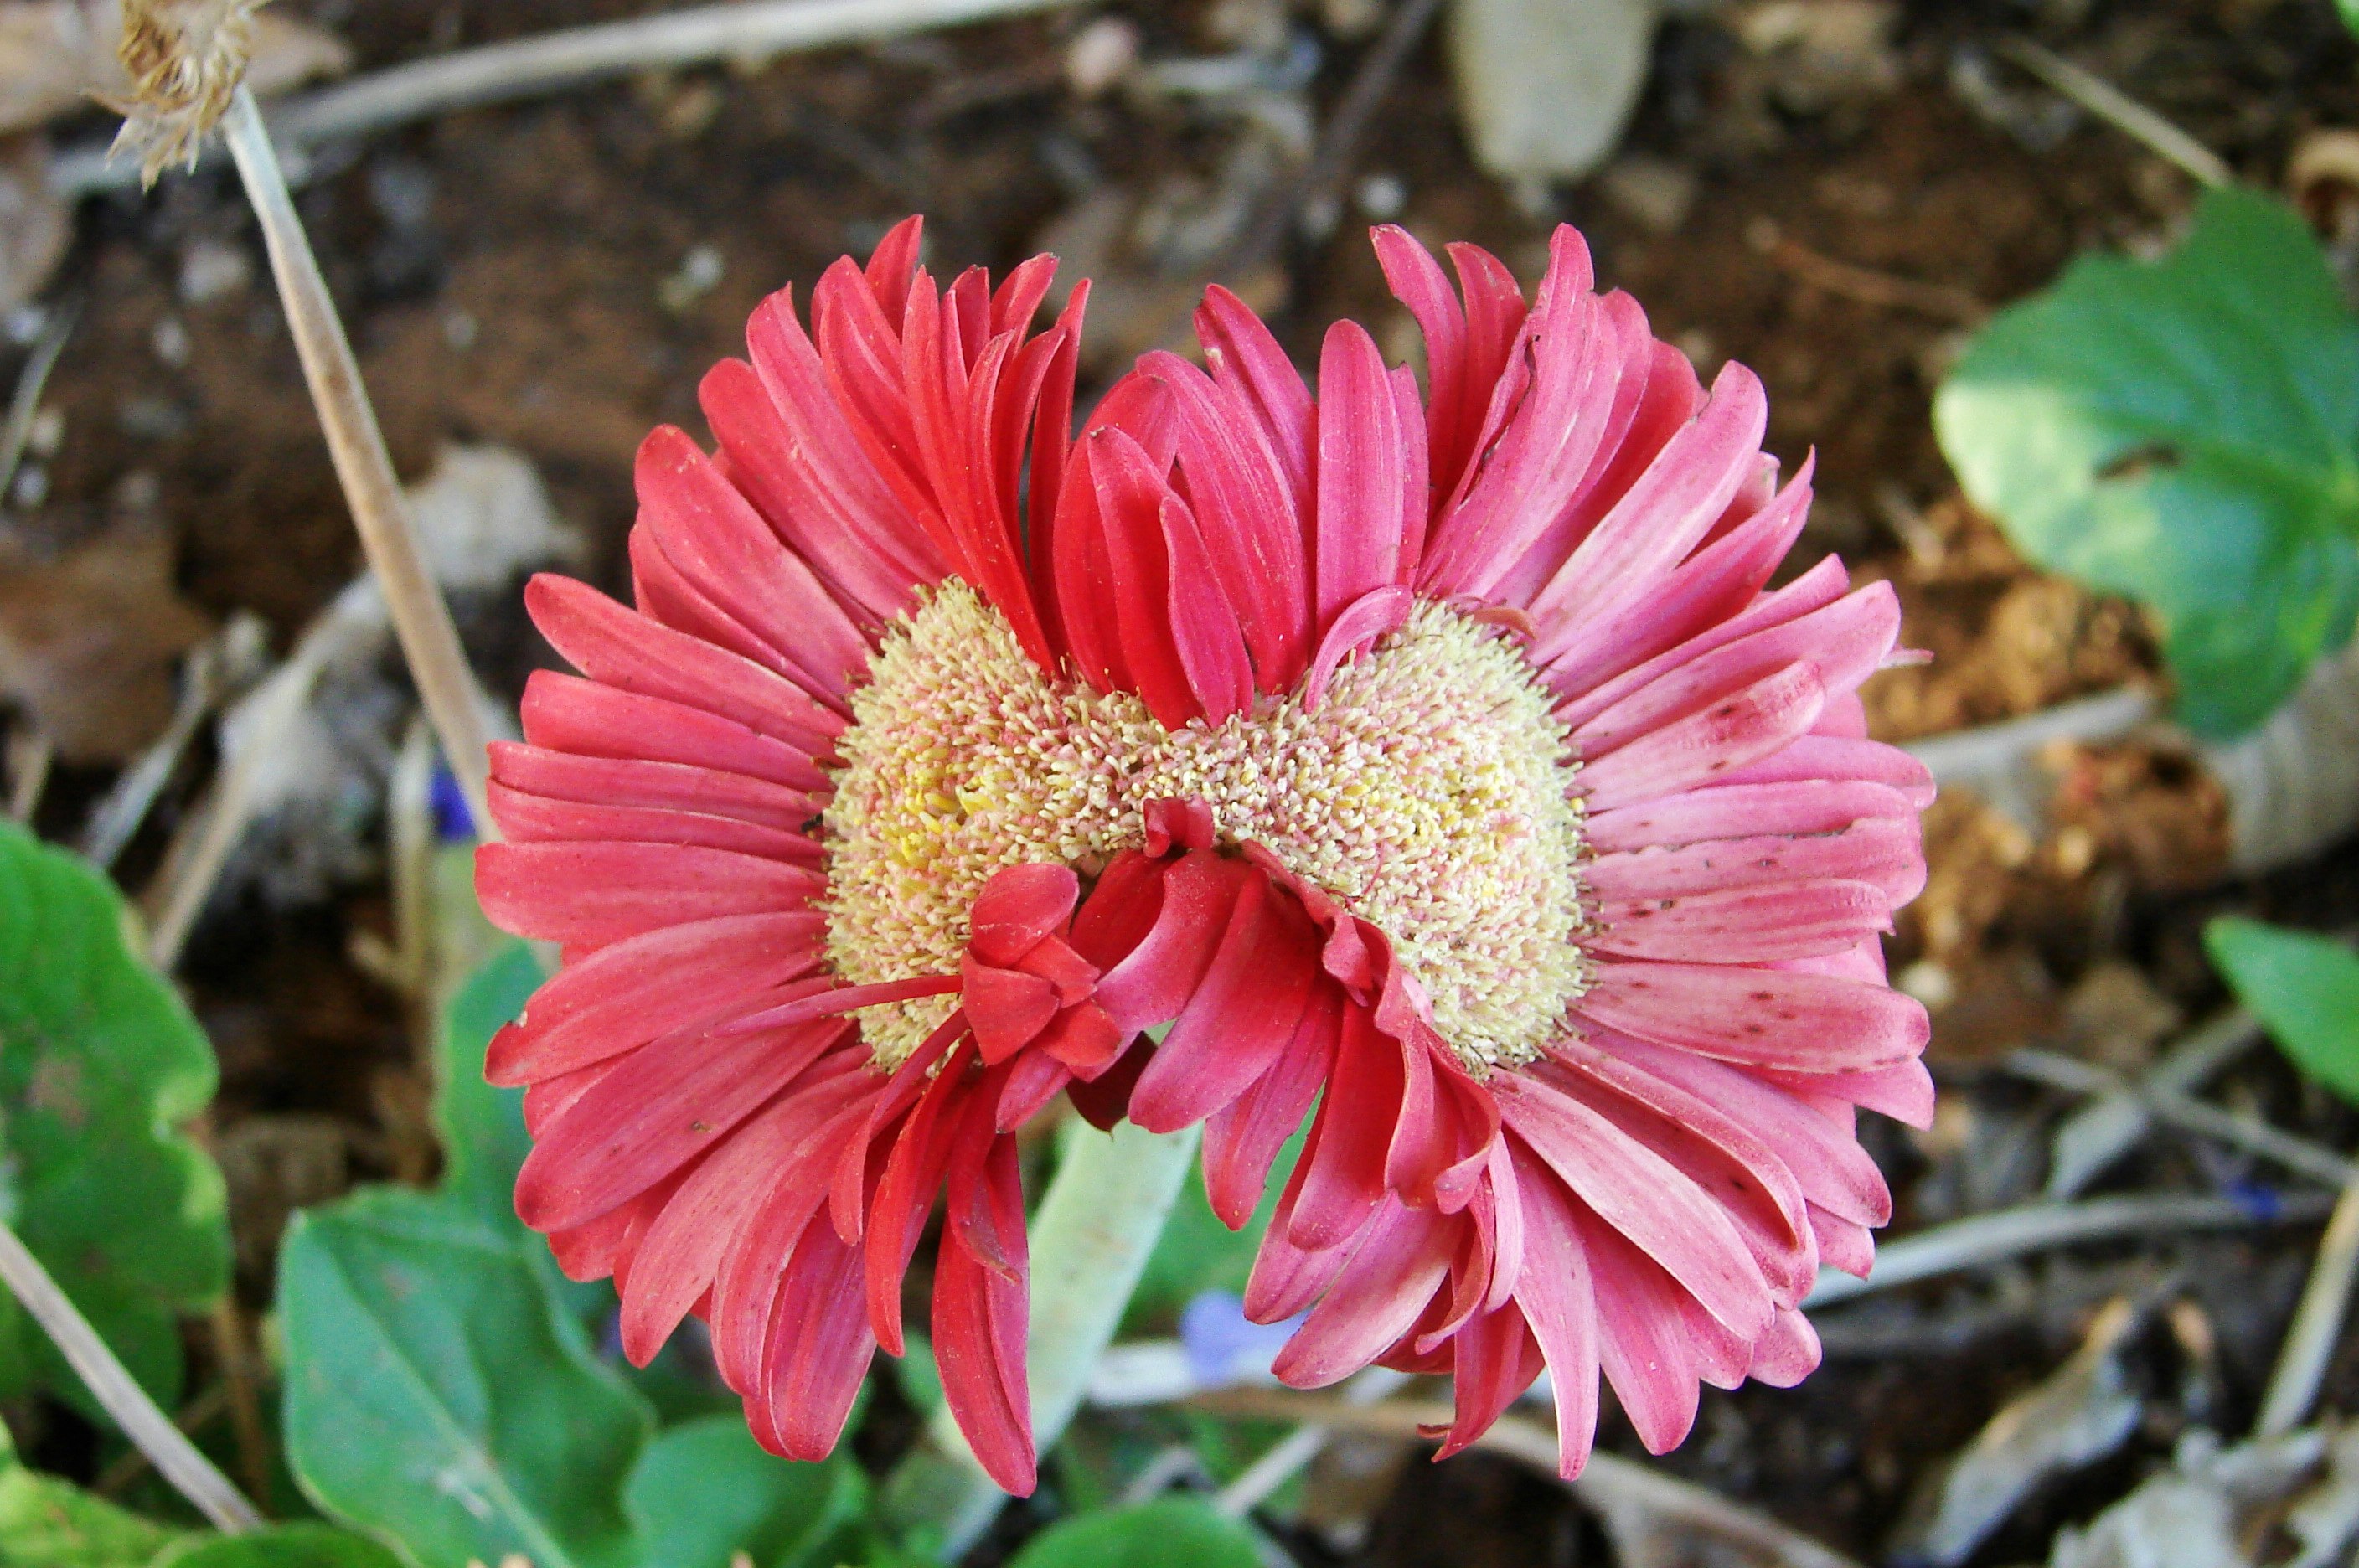 A red and yellow flower head with a mutated floret cluster